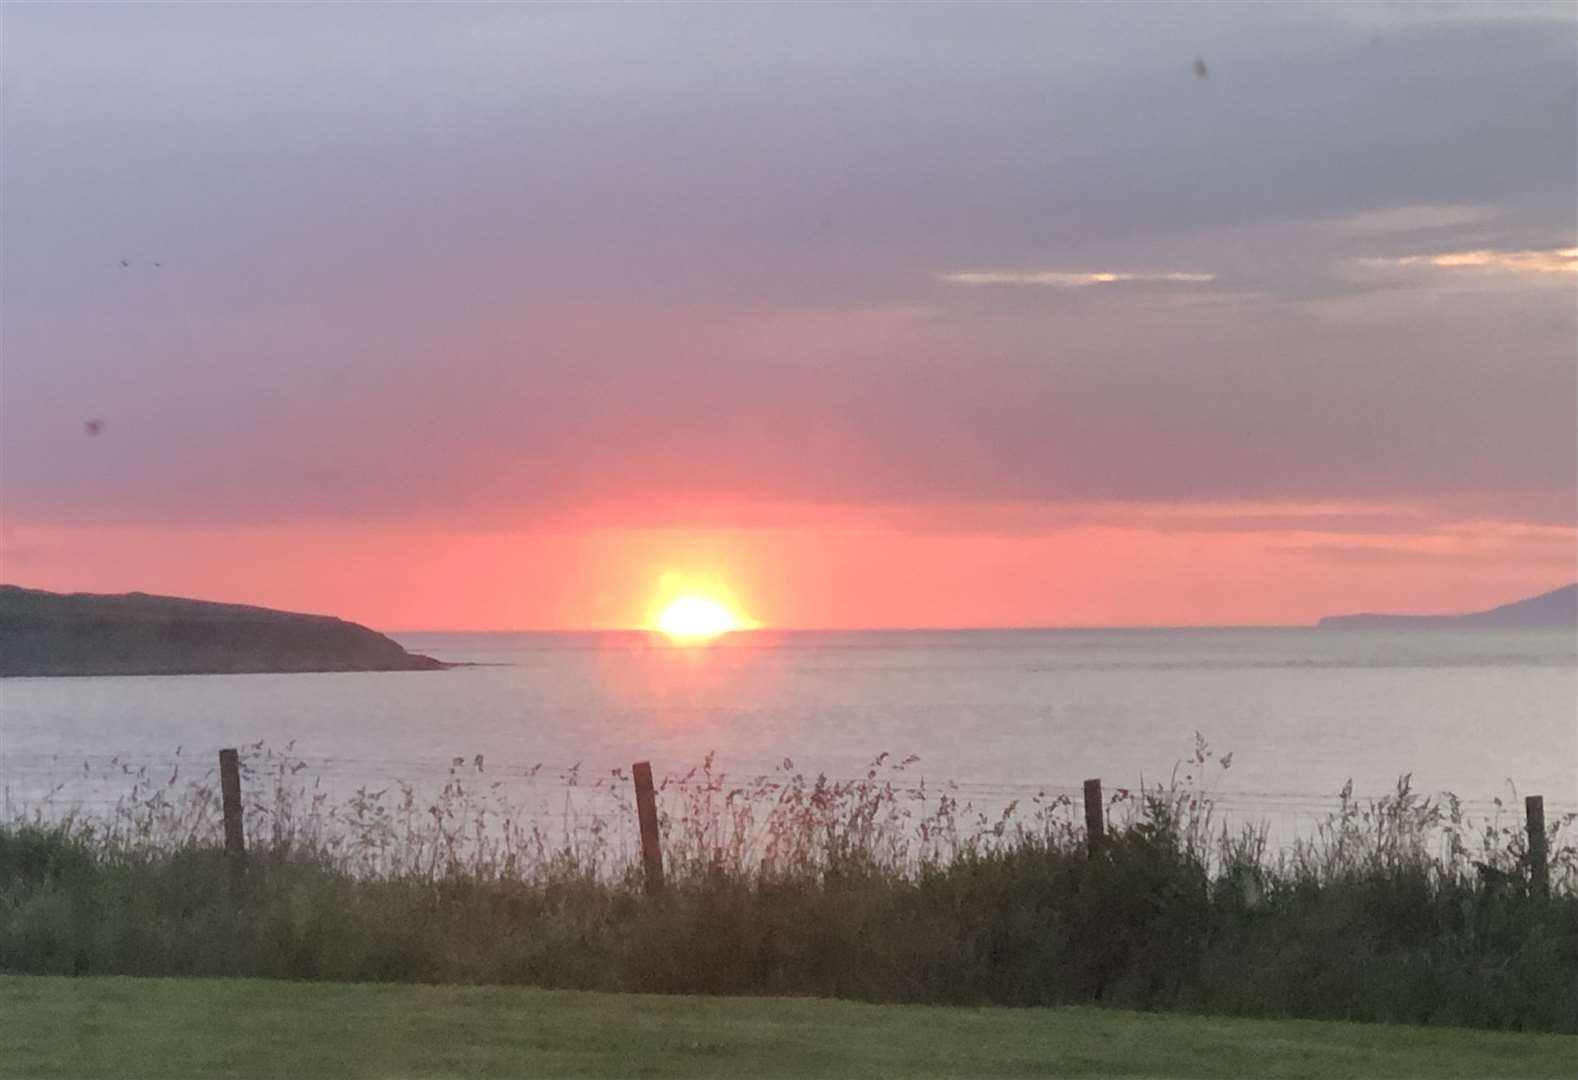 Lyall Rennie took this photo of the sun setting over the Pentland Firth.